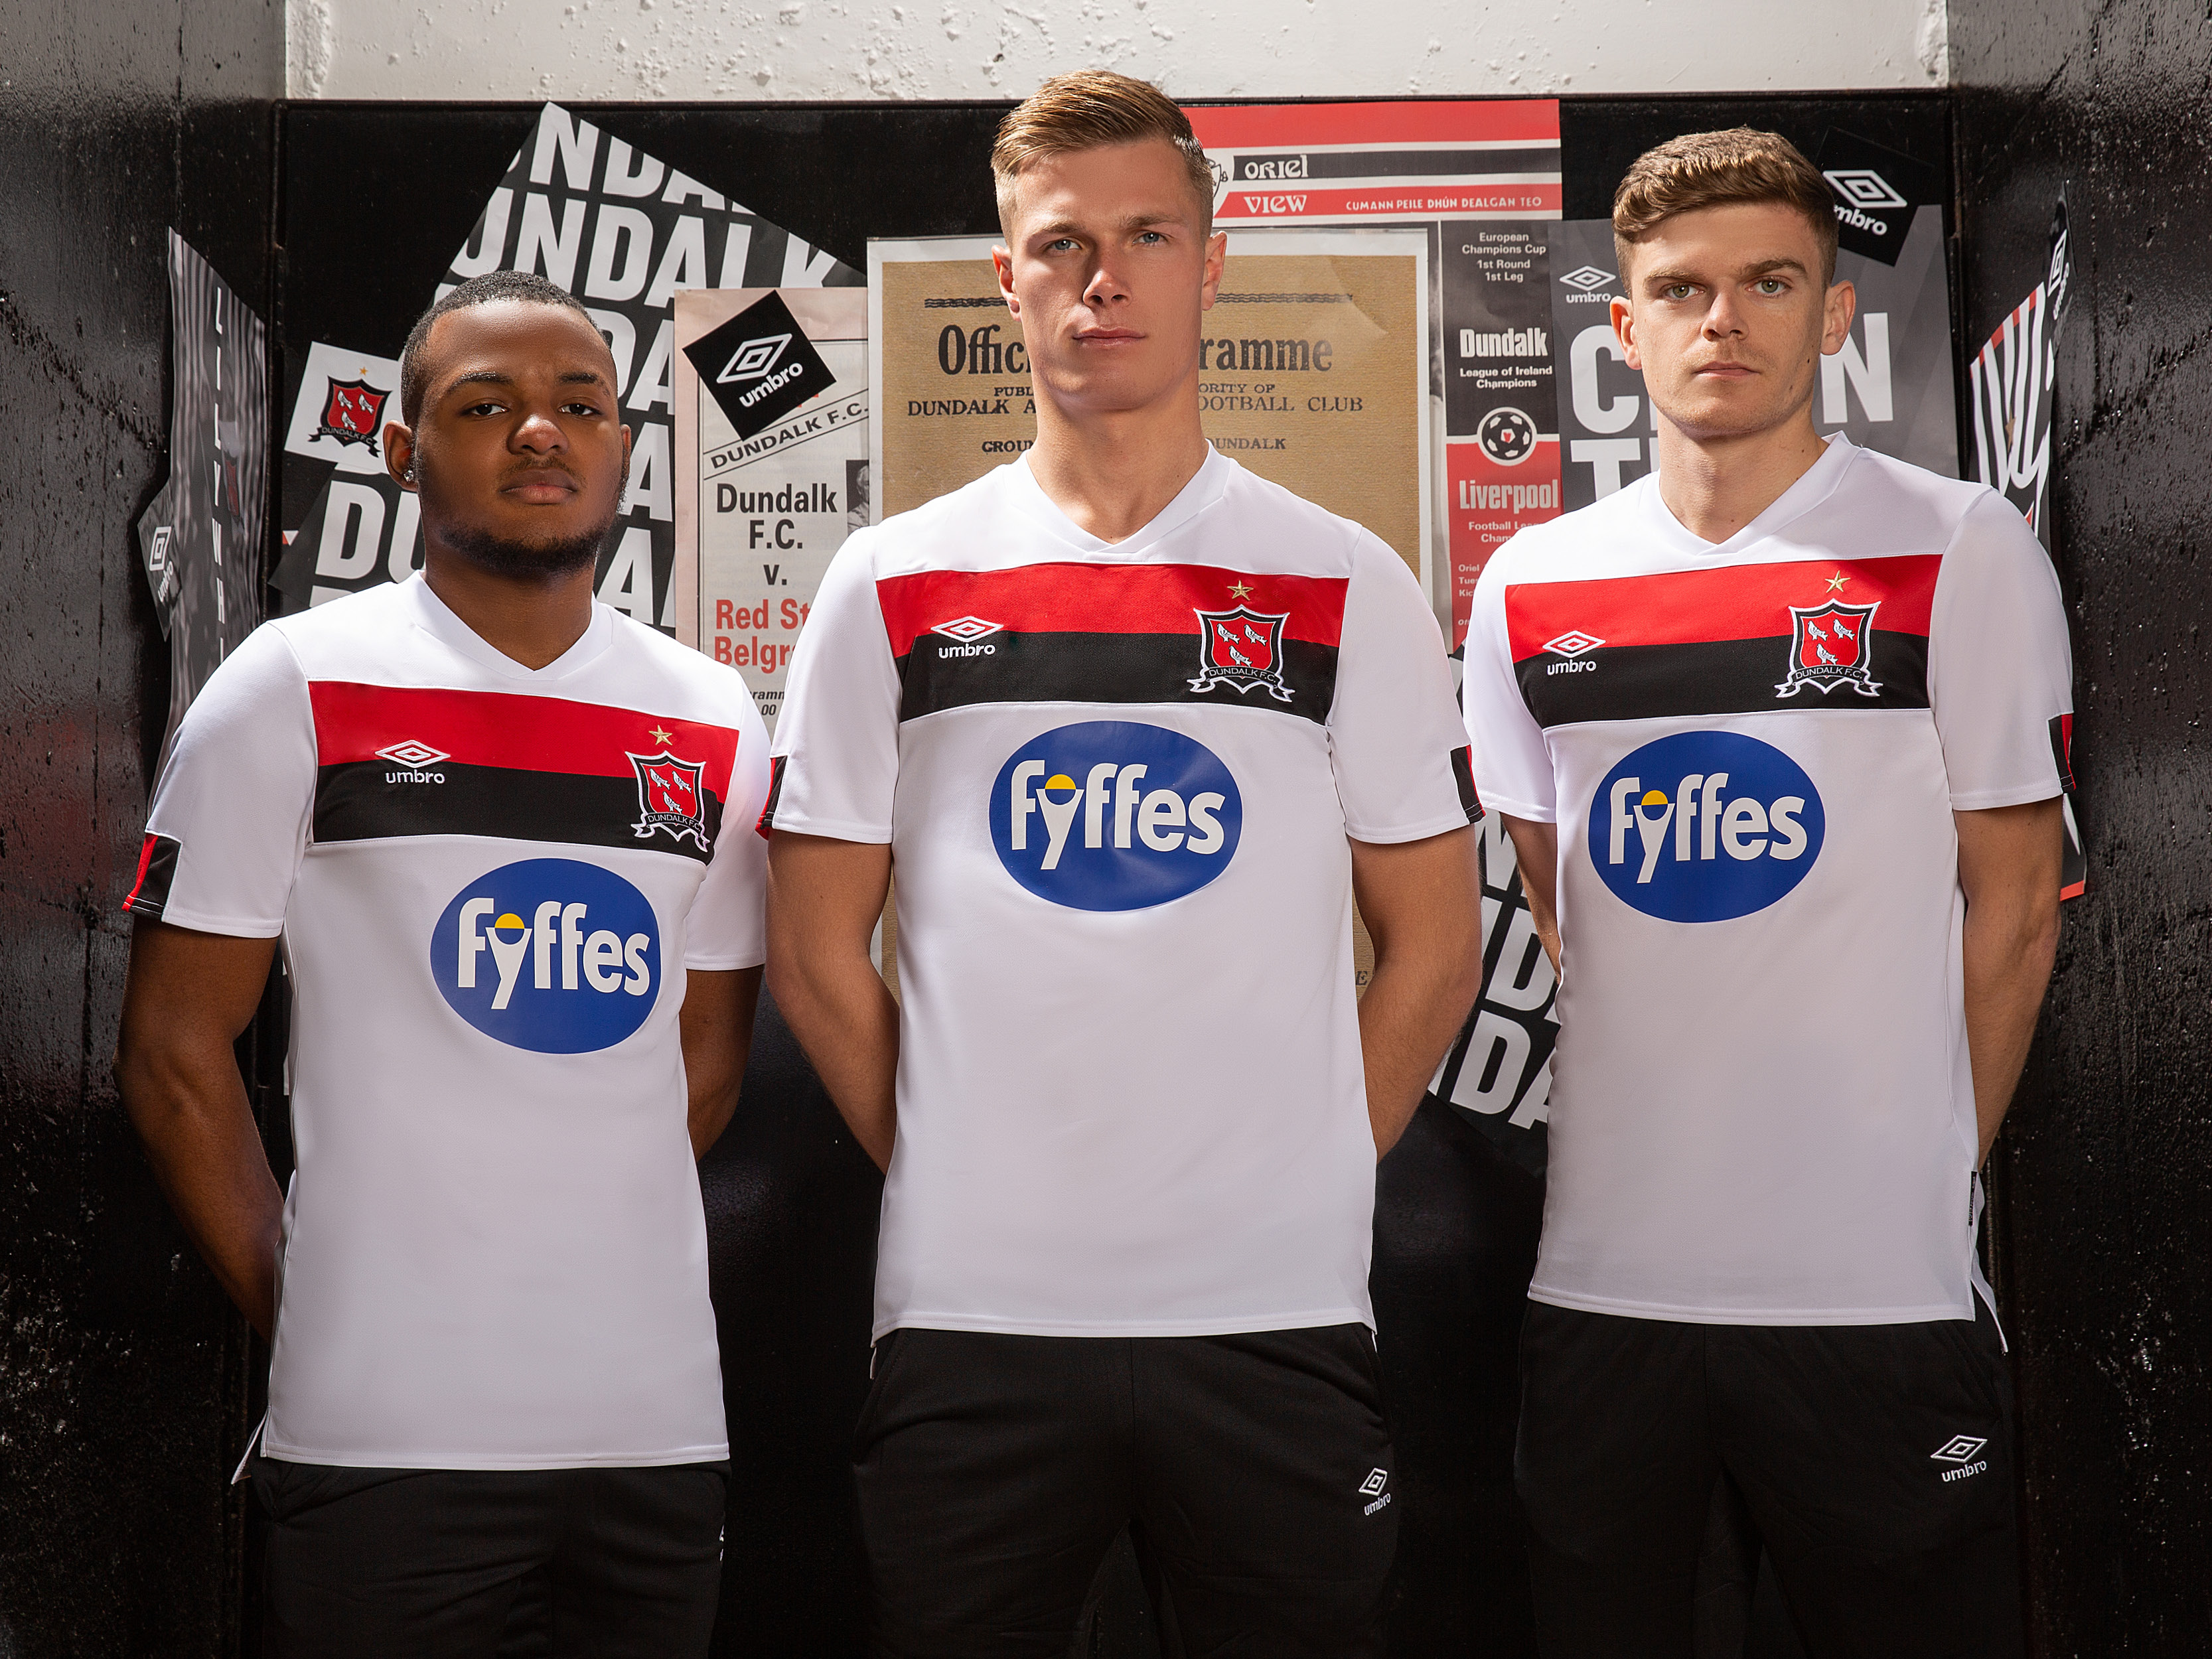 Leer Noord Amerika Commotie Dundalk FC on Twitter: "2020 VISION | Presenting the new #DundalkFC  @UmbroIreland home kit for the 2020 season. Available to buy on Saturday 30  November. ➡️ https://t.co/cRpvlQlj1L #BackToUmbro #2020Vision  https://t.co/xYQreuDN68" / Twitter